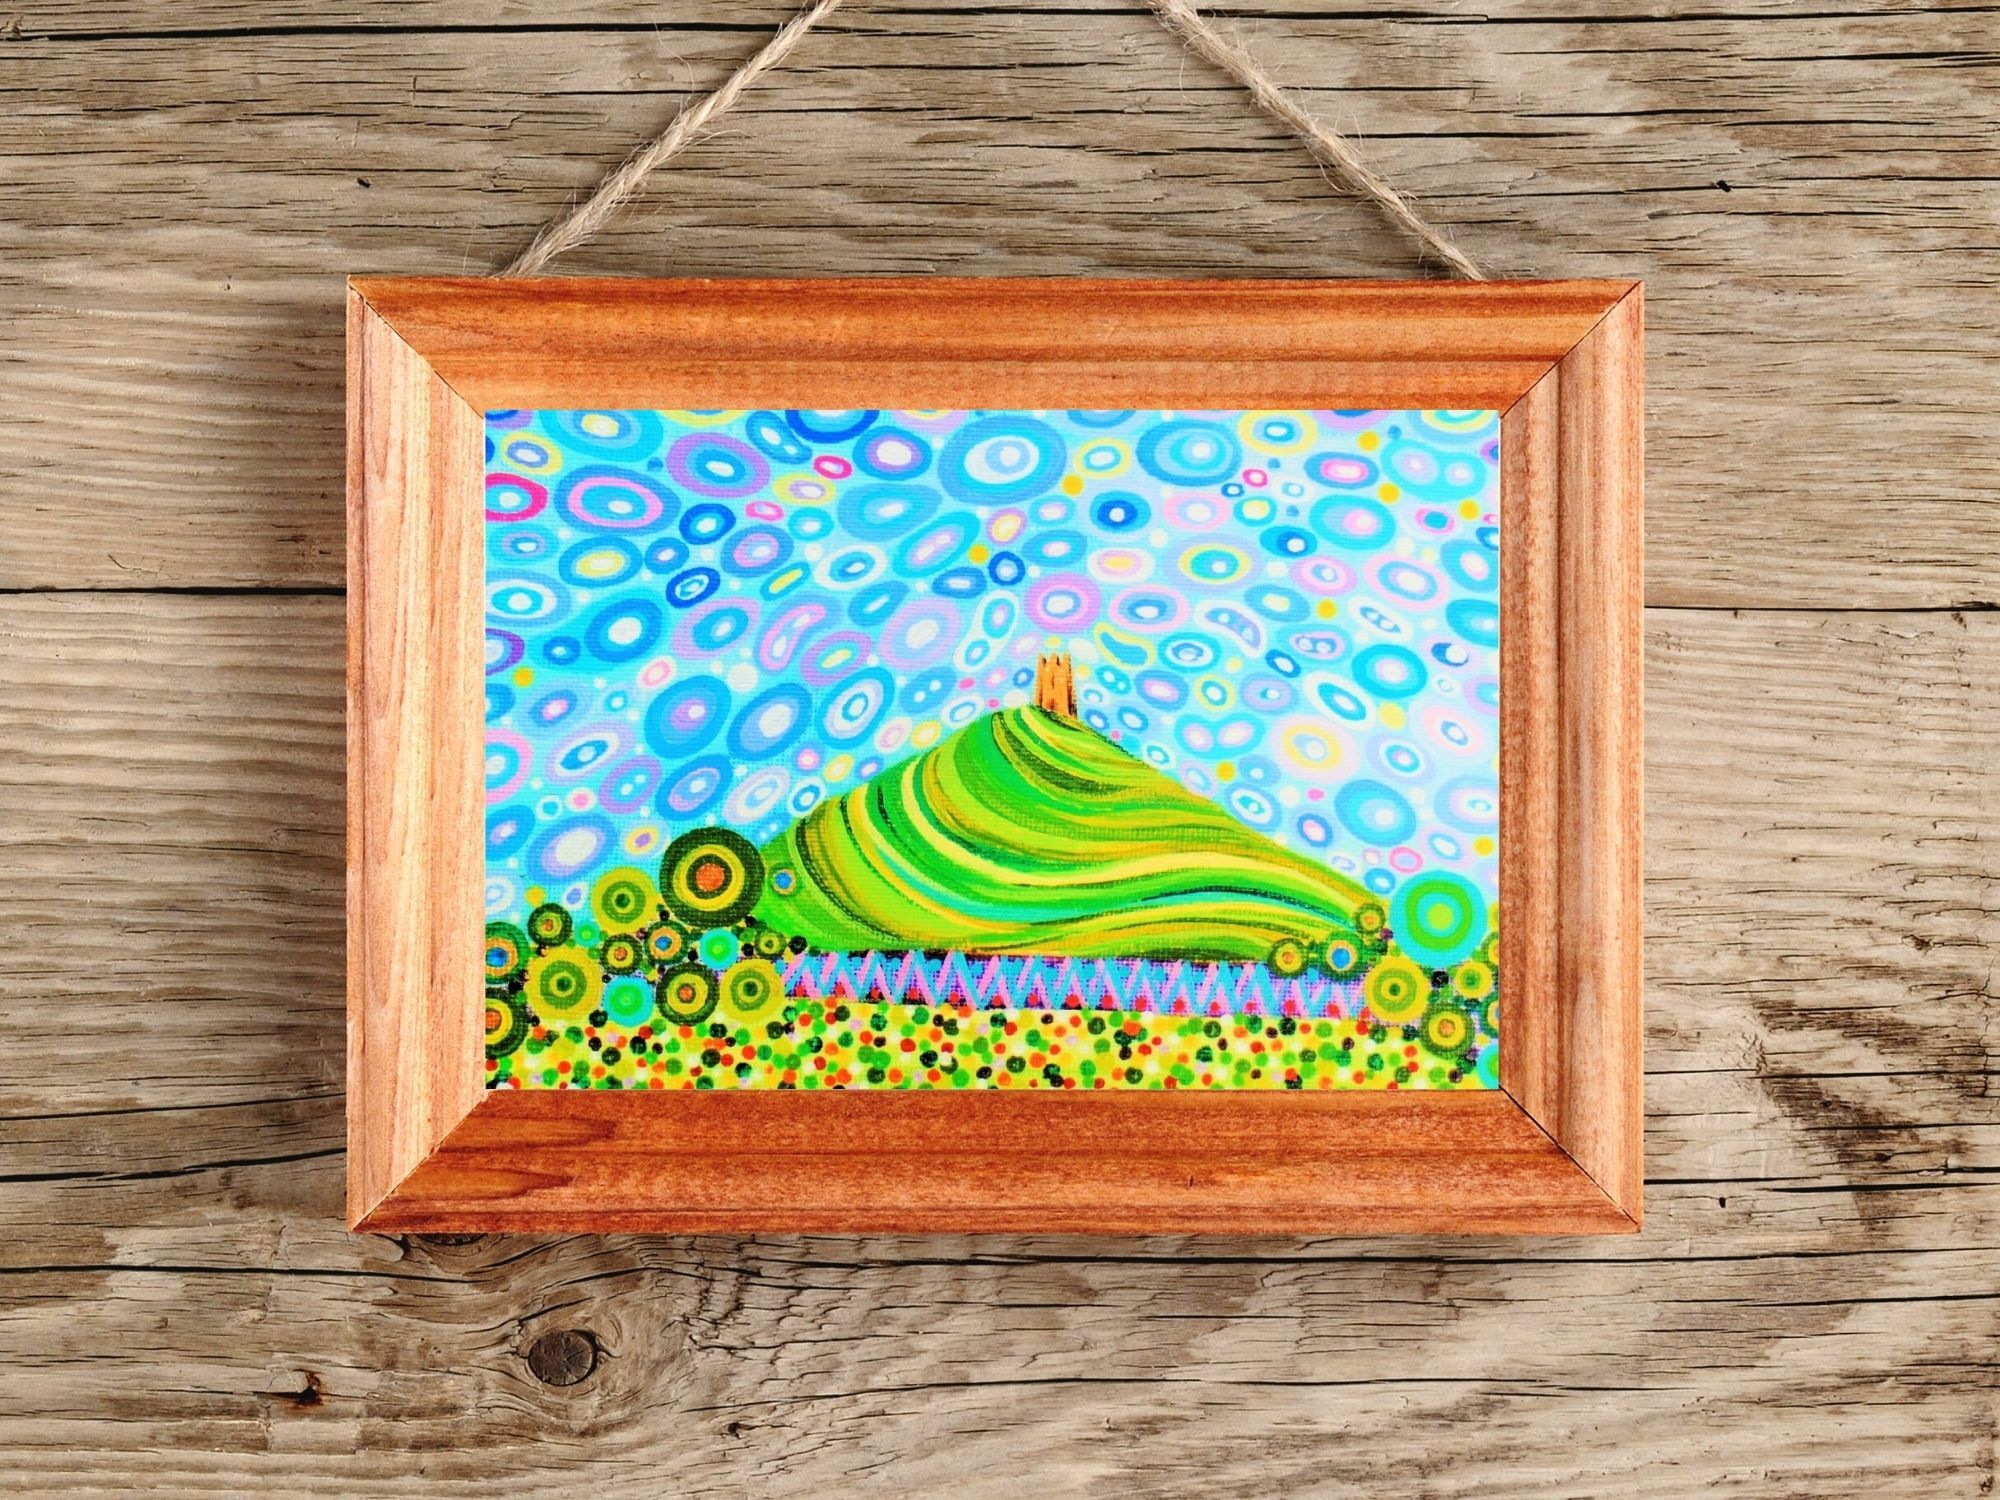 A colourful abstract art print of Glastonbury Tor, download and printable at home, in a wood effect frame (not available to purchase)